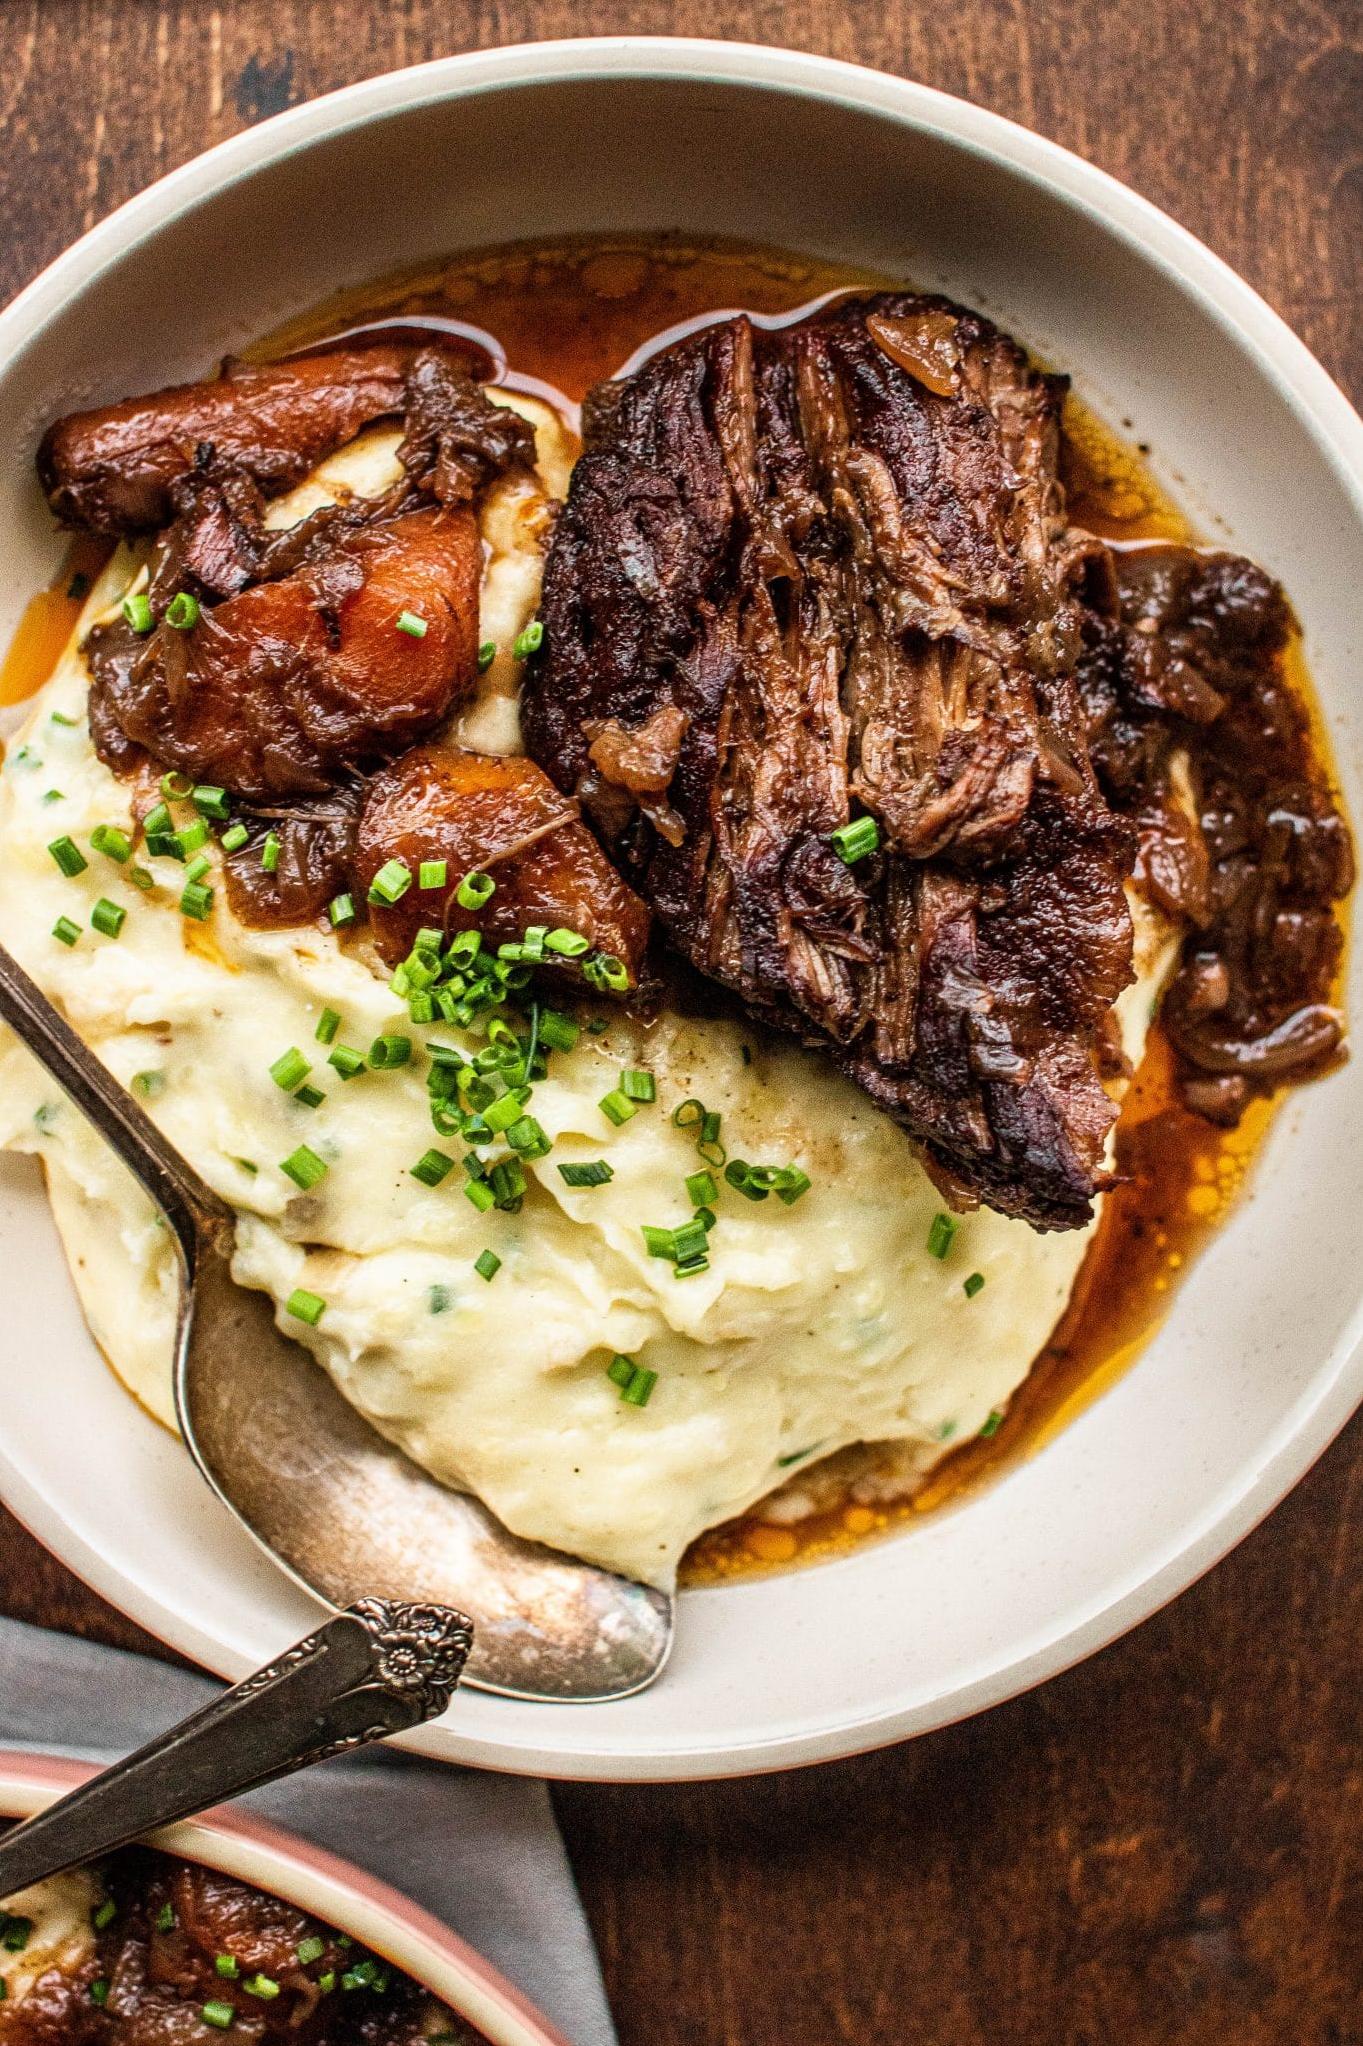 Savory Beef Braised in Rich Red Wine